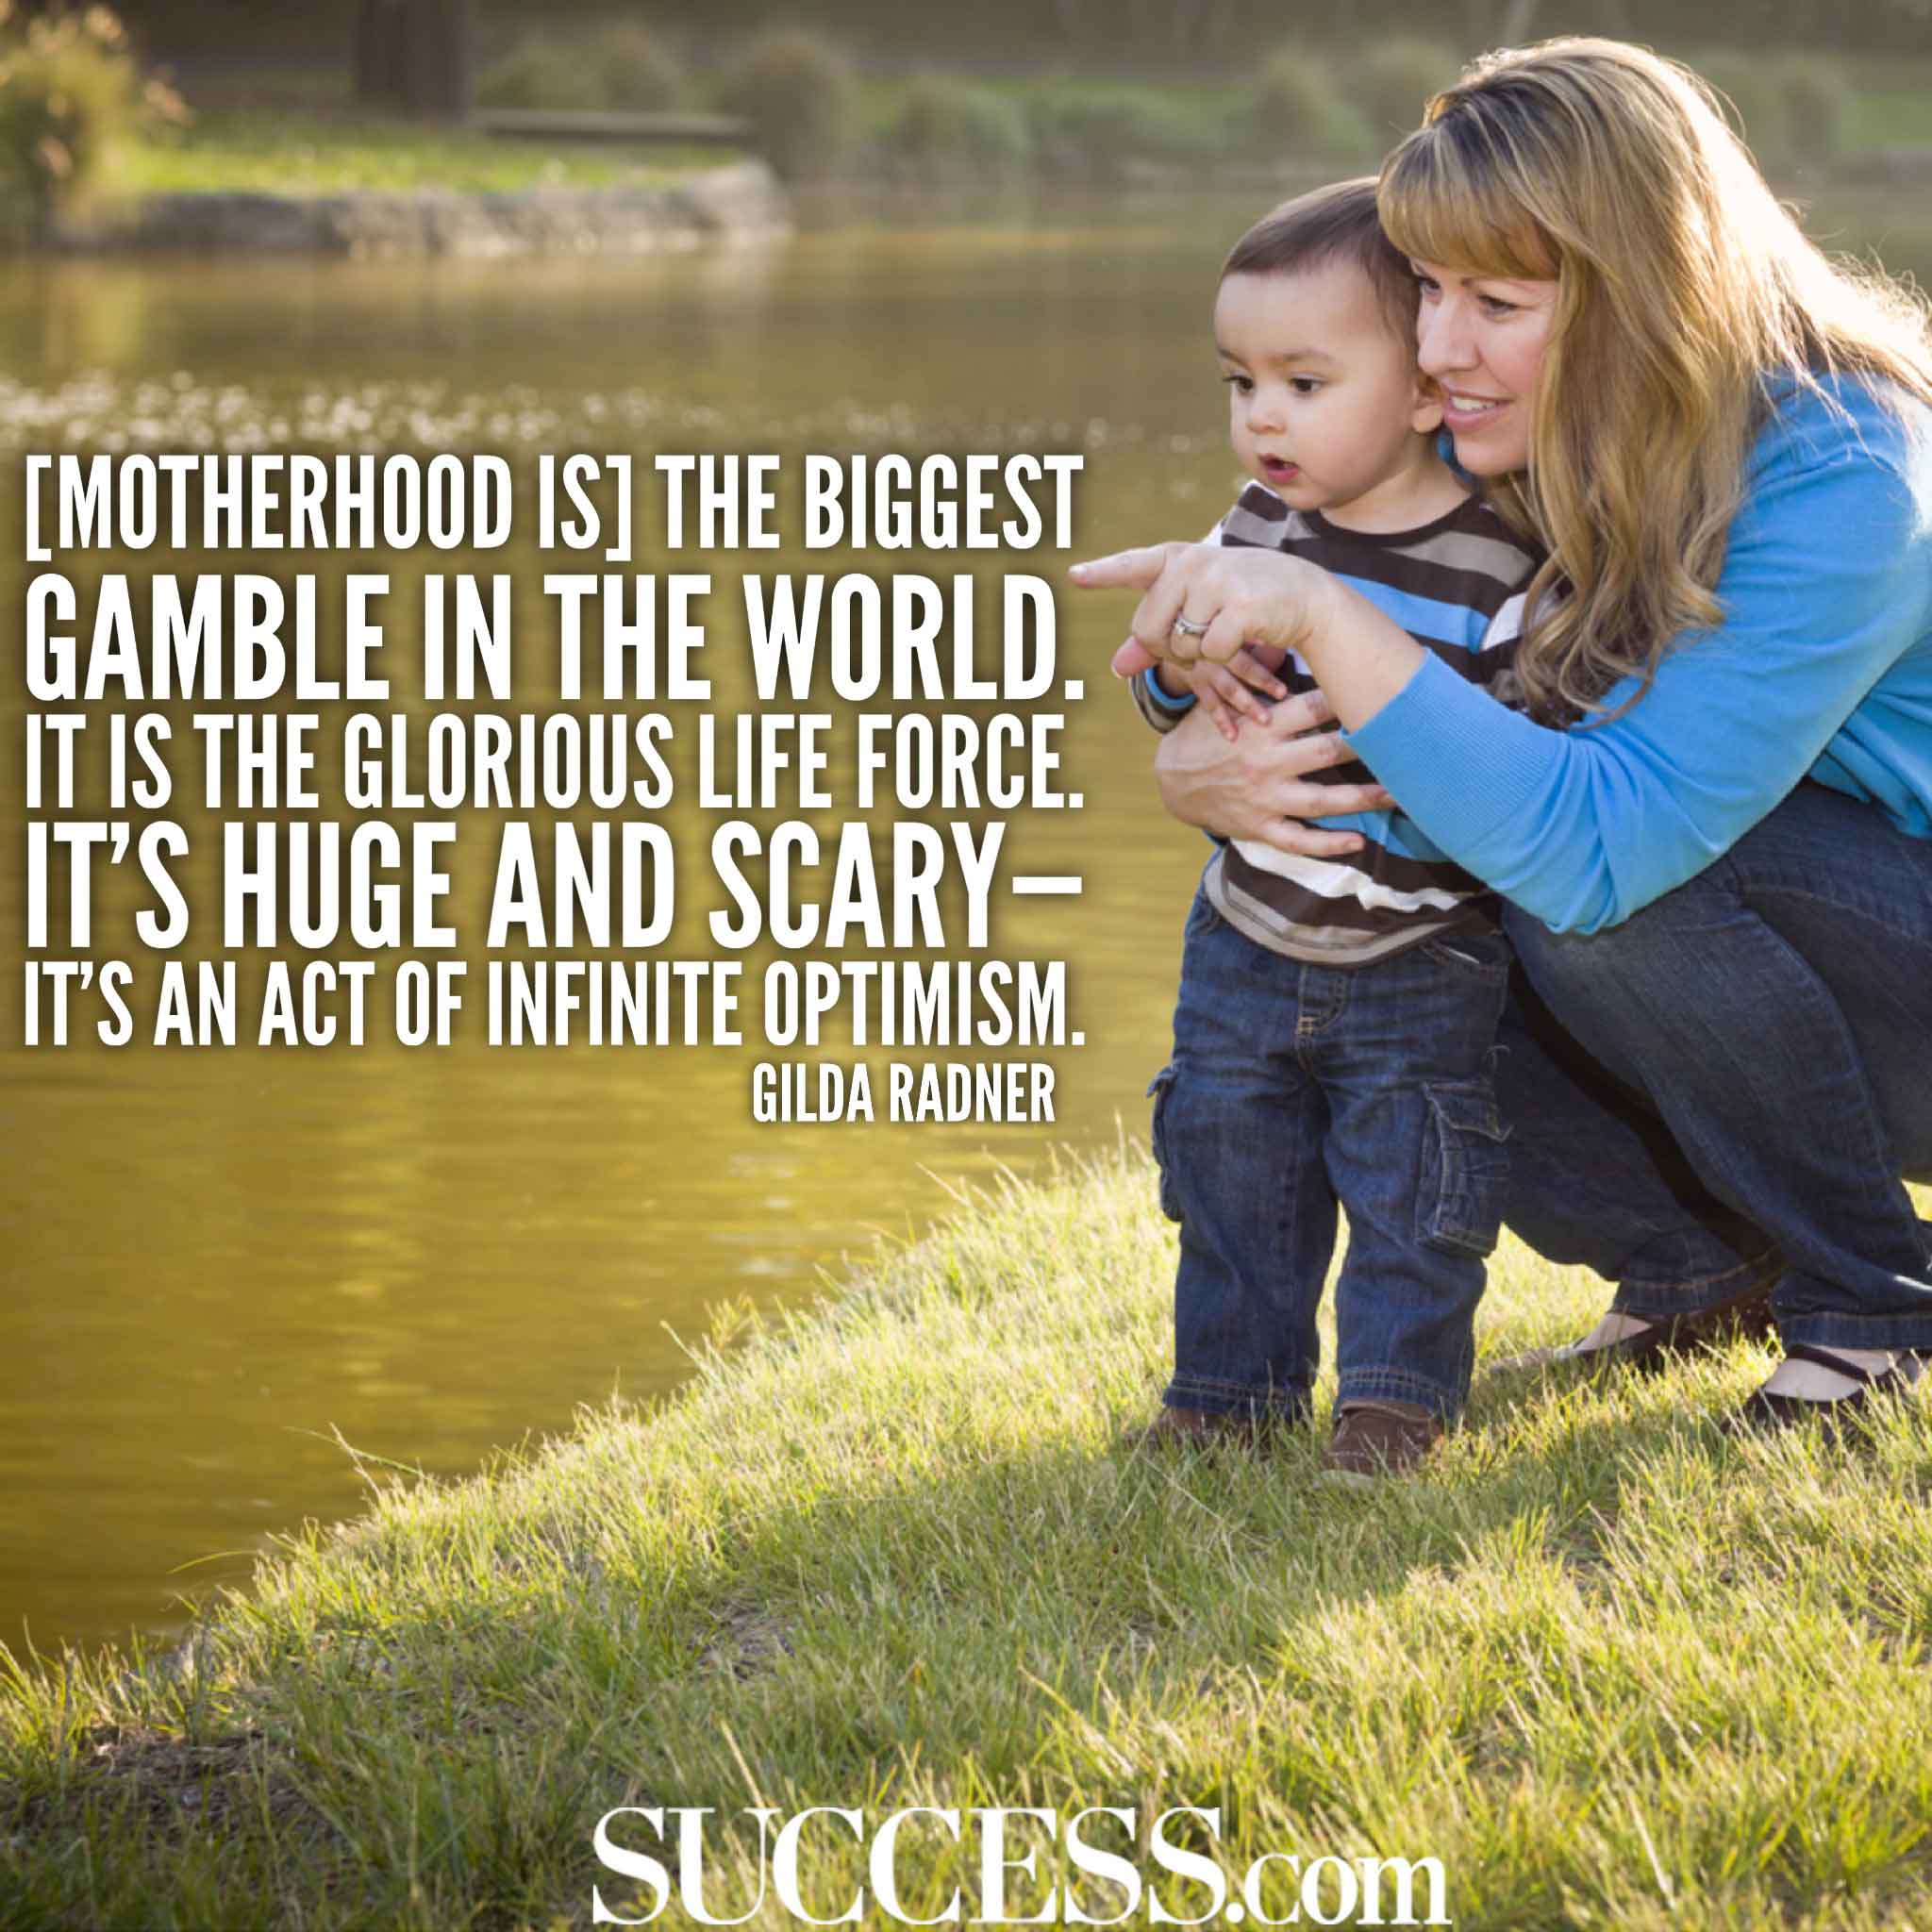 15 Loving Quotes About the Joys of Motherhood